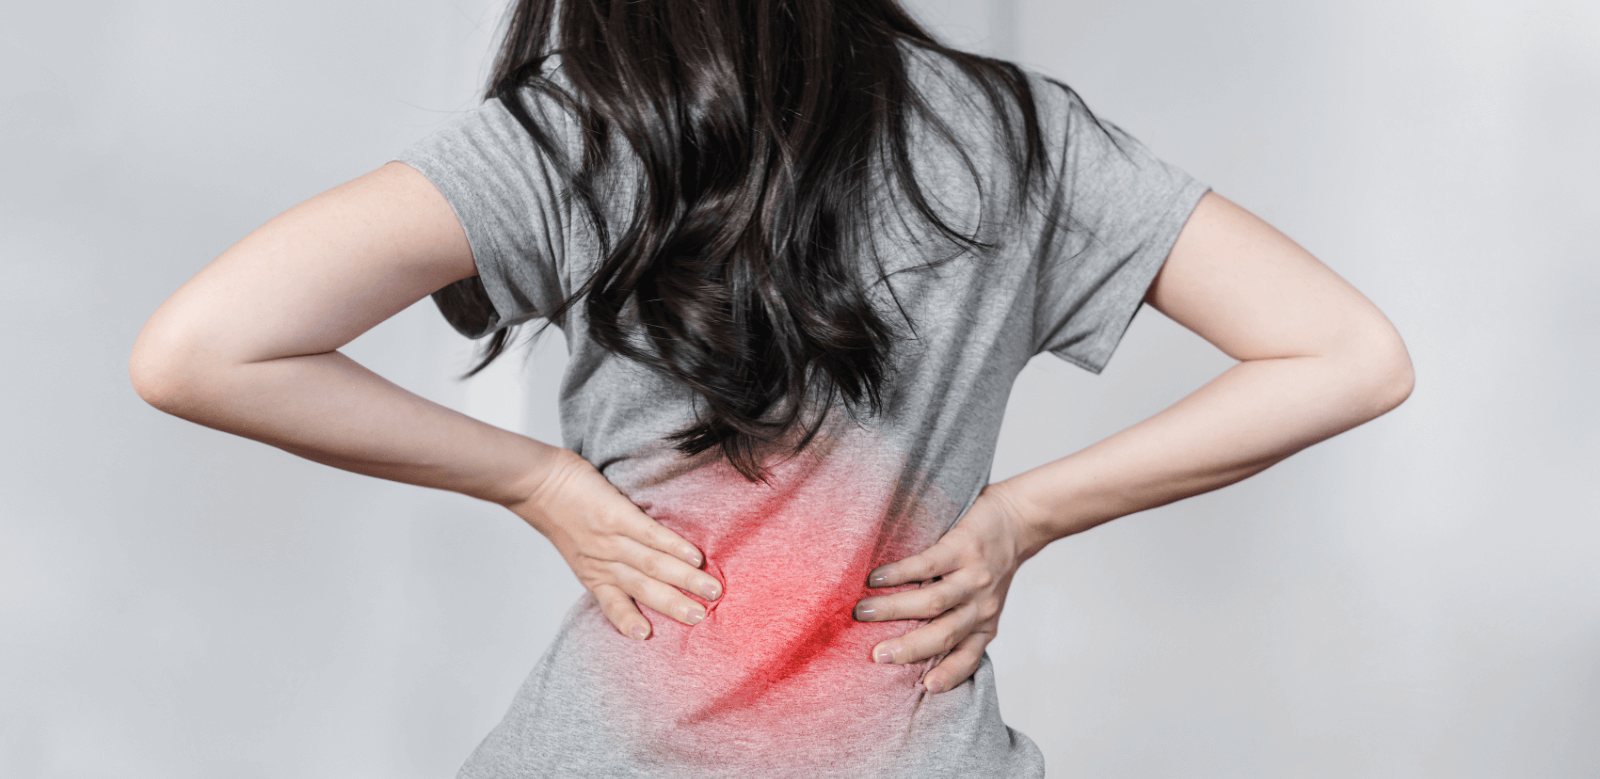 Is Middle Back Pain When Breathing Normal?